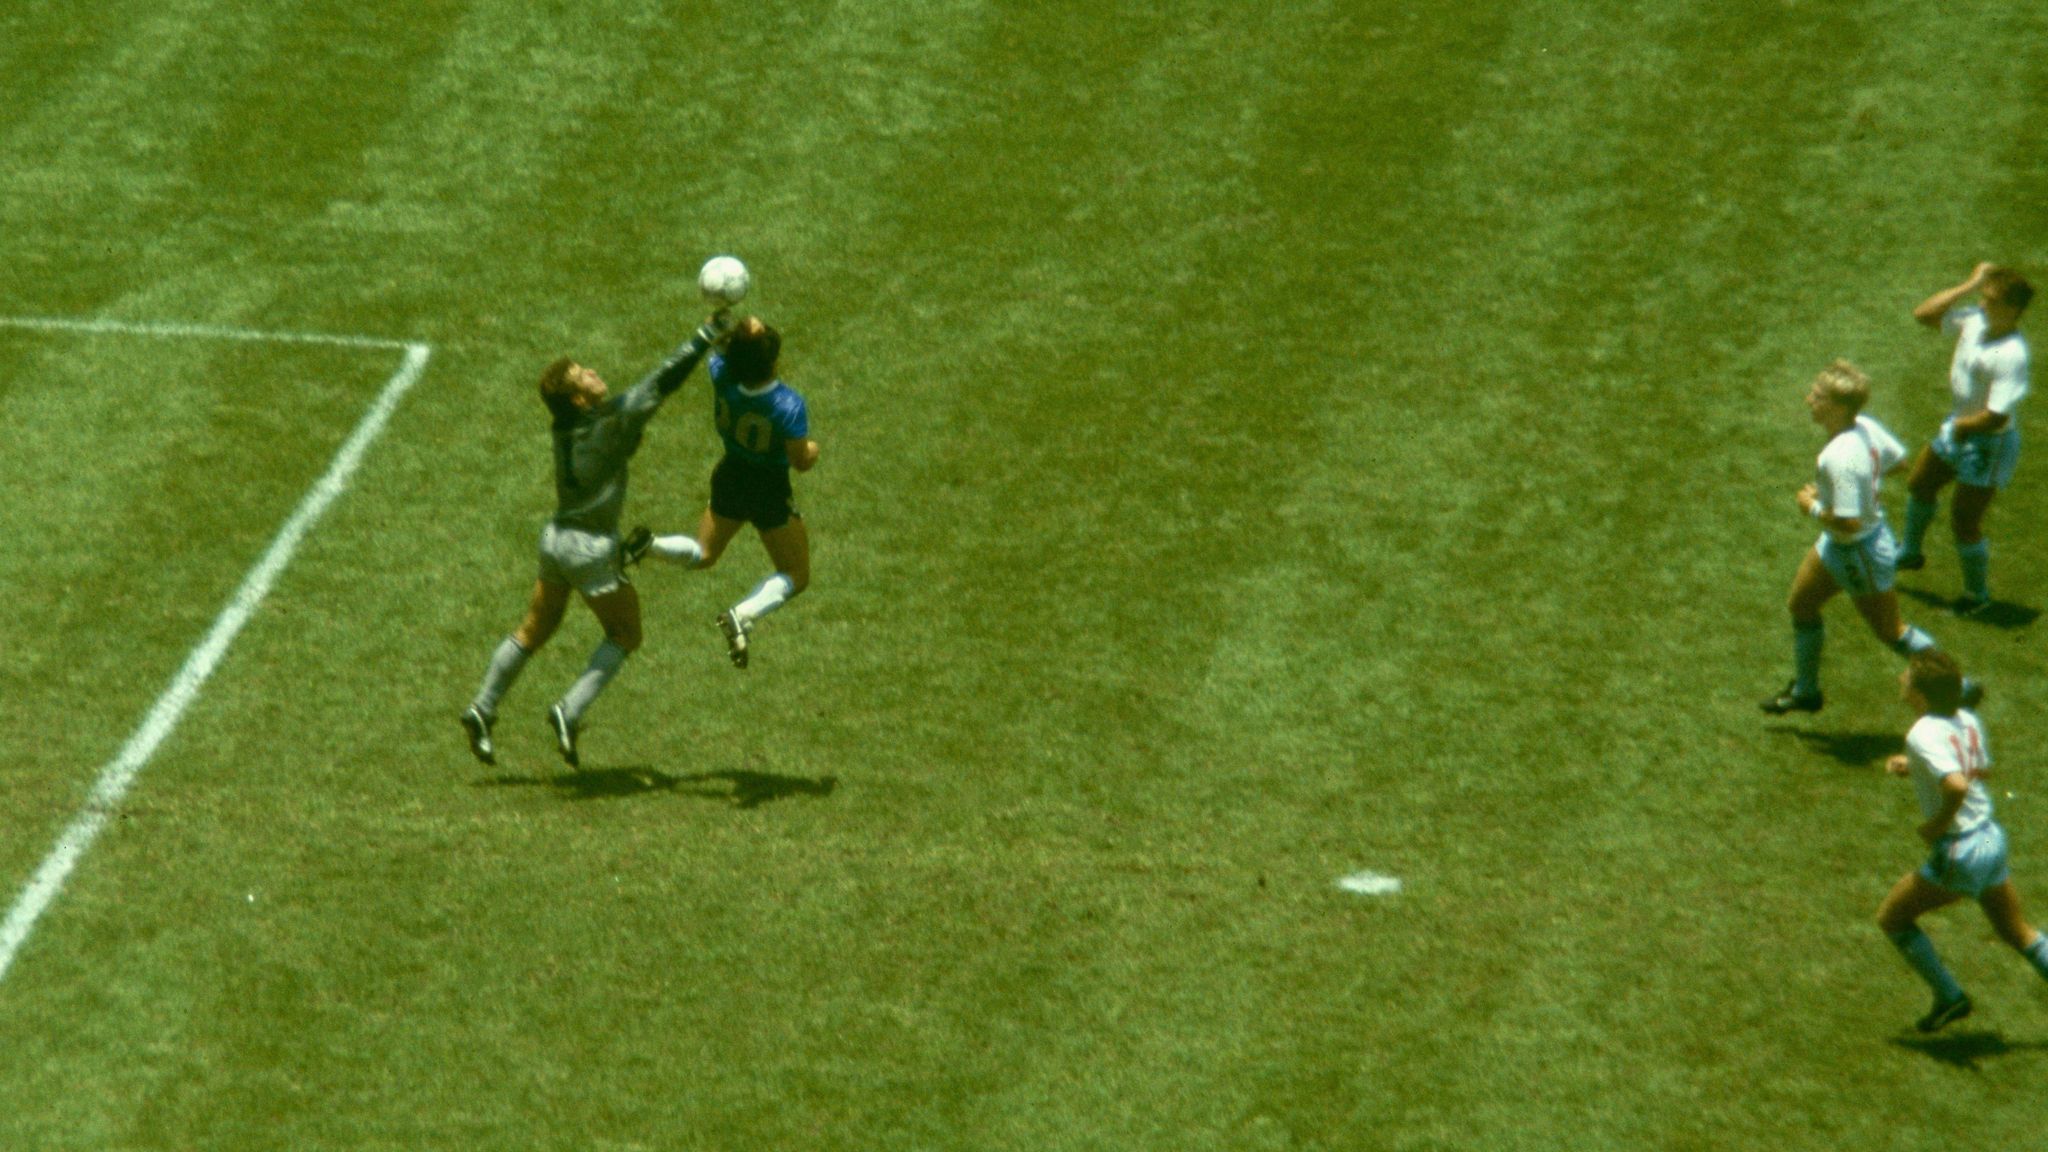 Diego Maradona scores his 'Hand of God' goal for Argentina against England at the 1986 World Cup